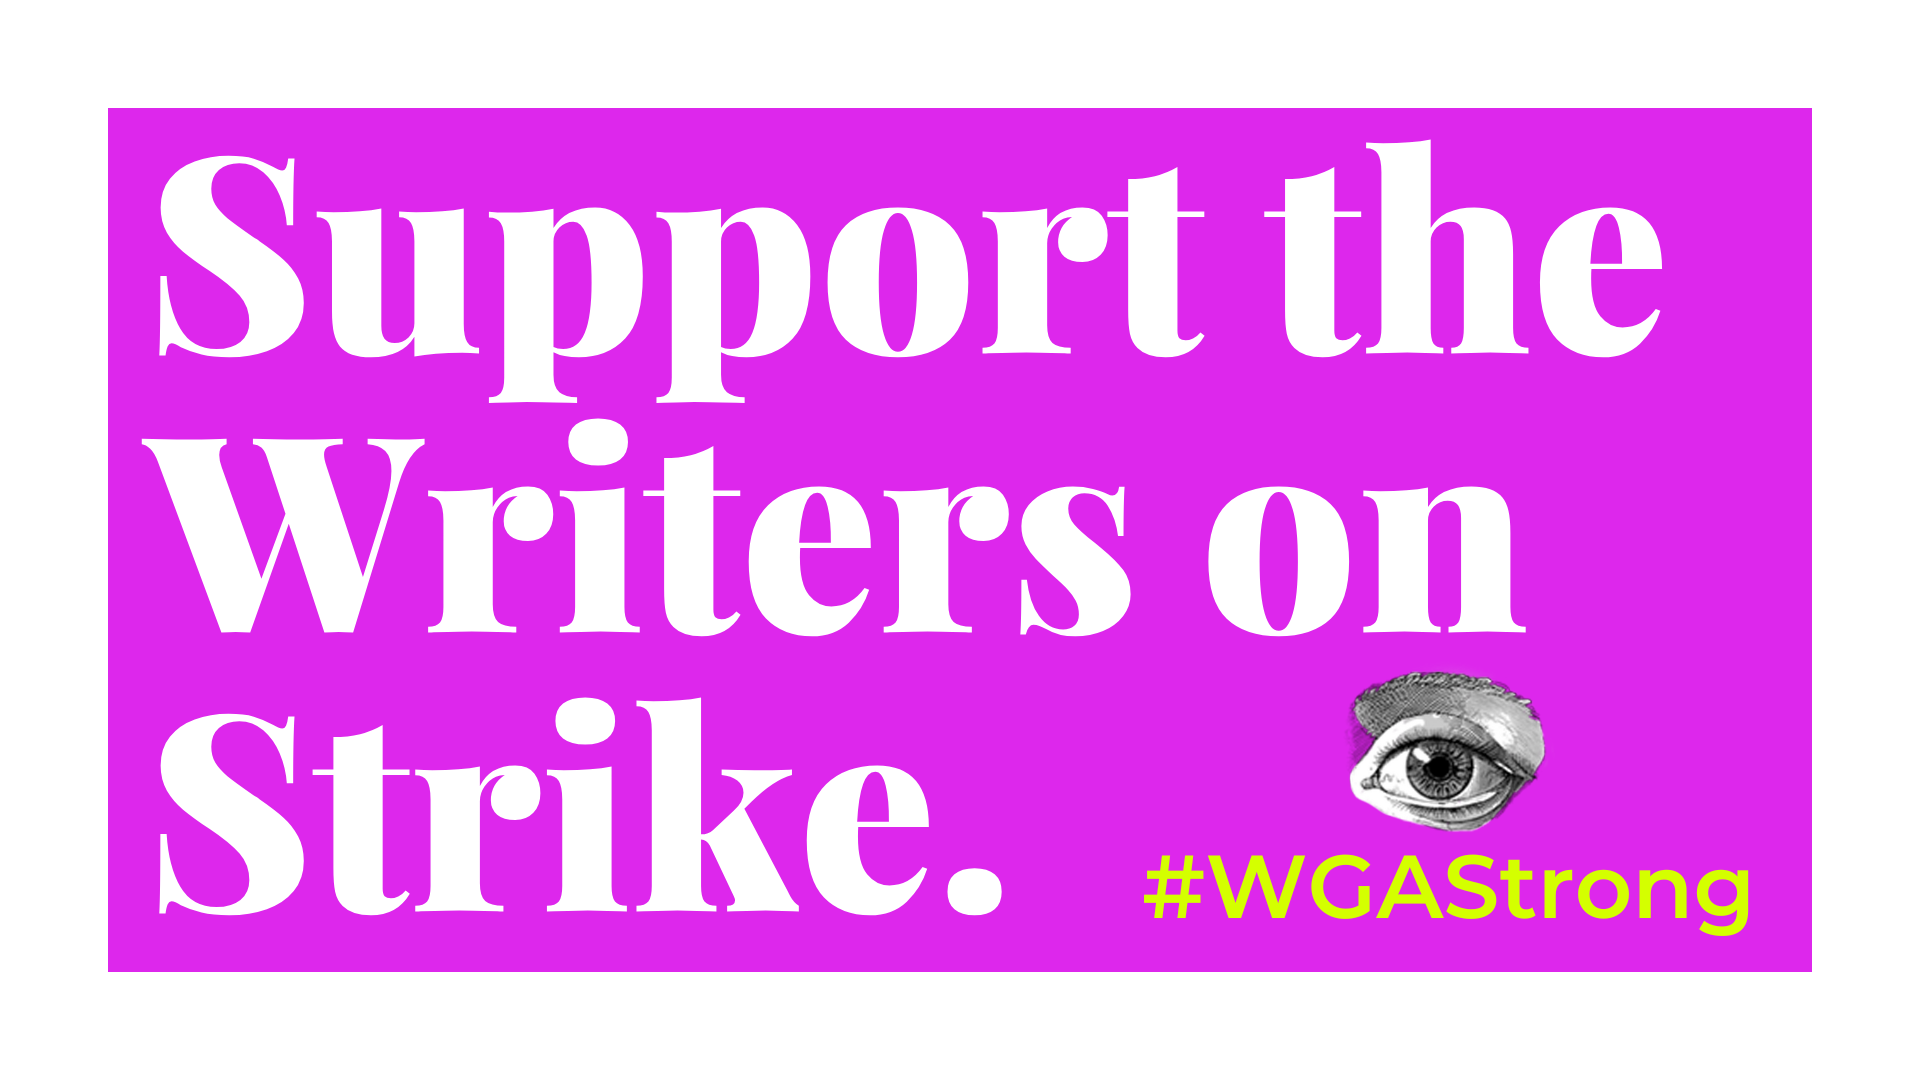 Support the Writers on Strike #WGAStrong